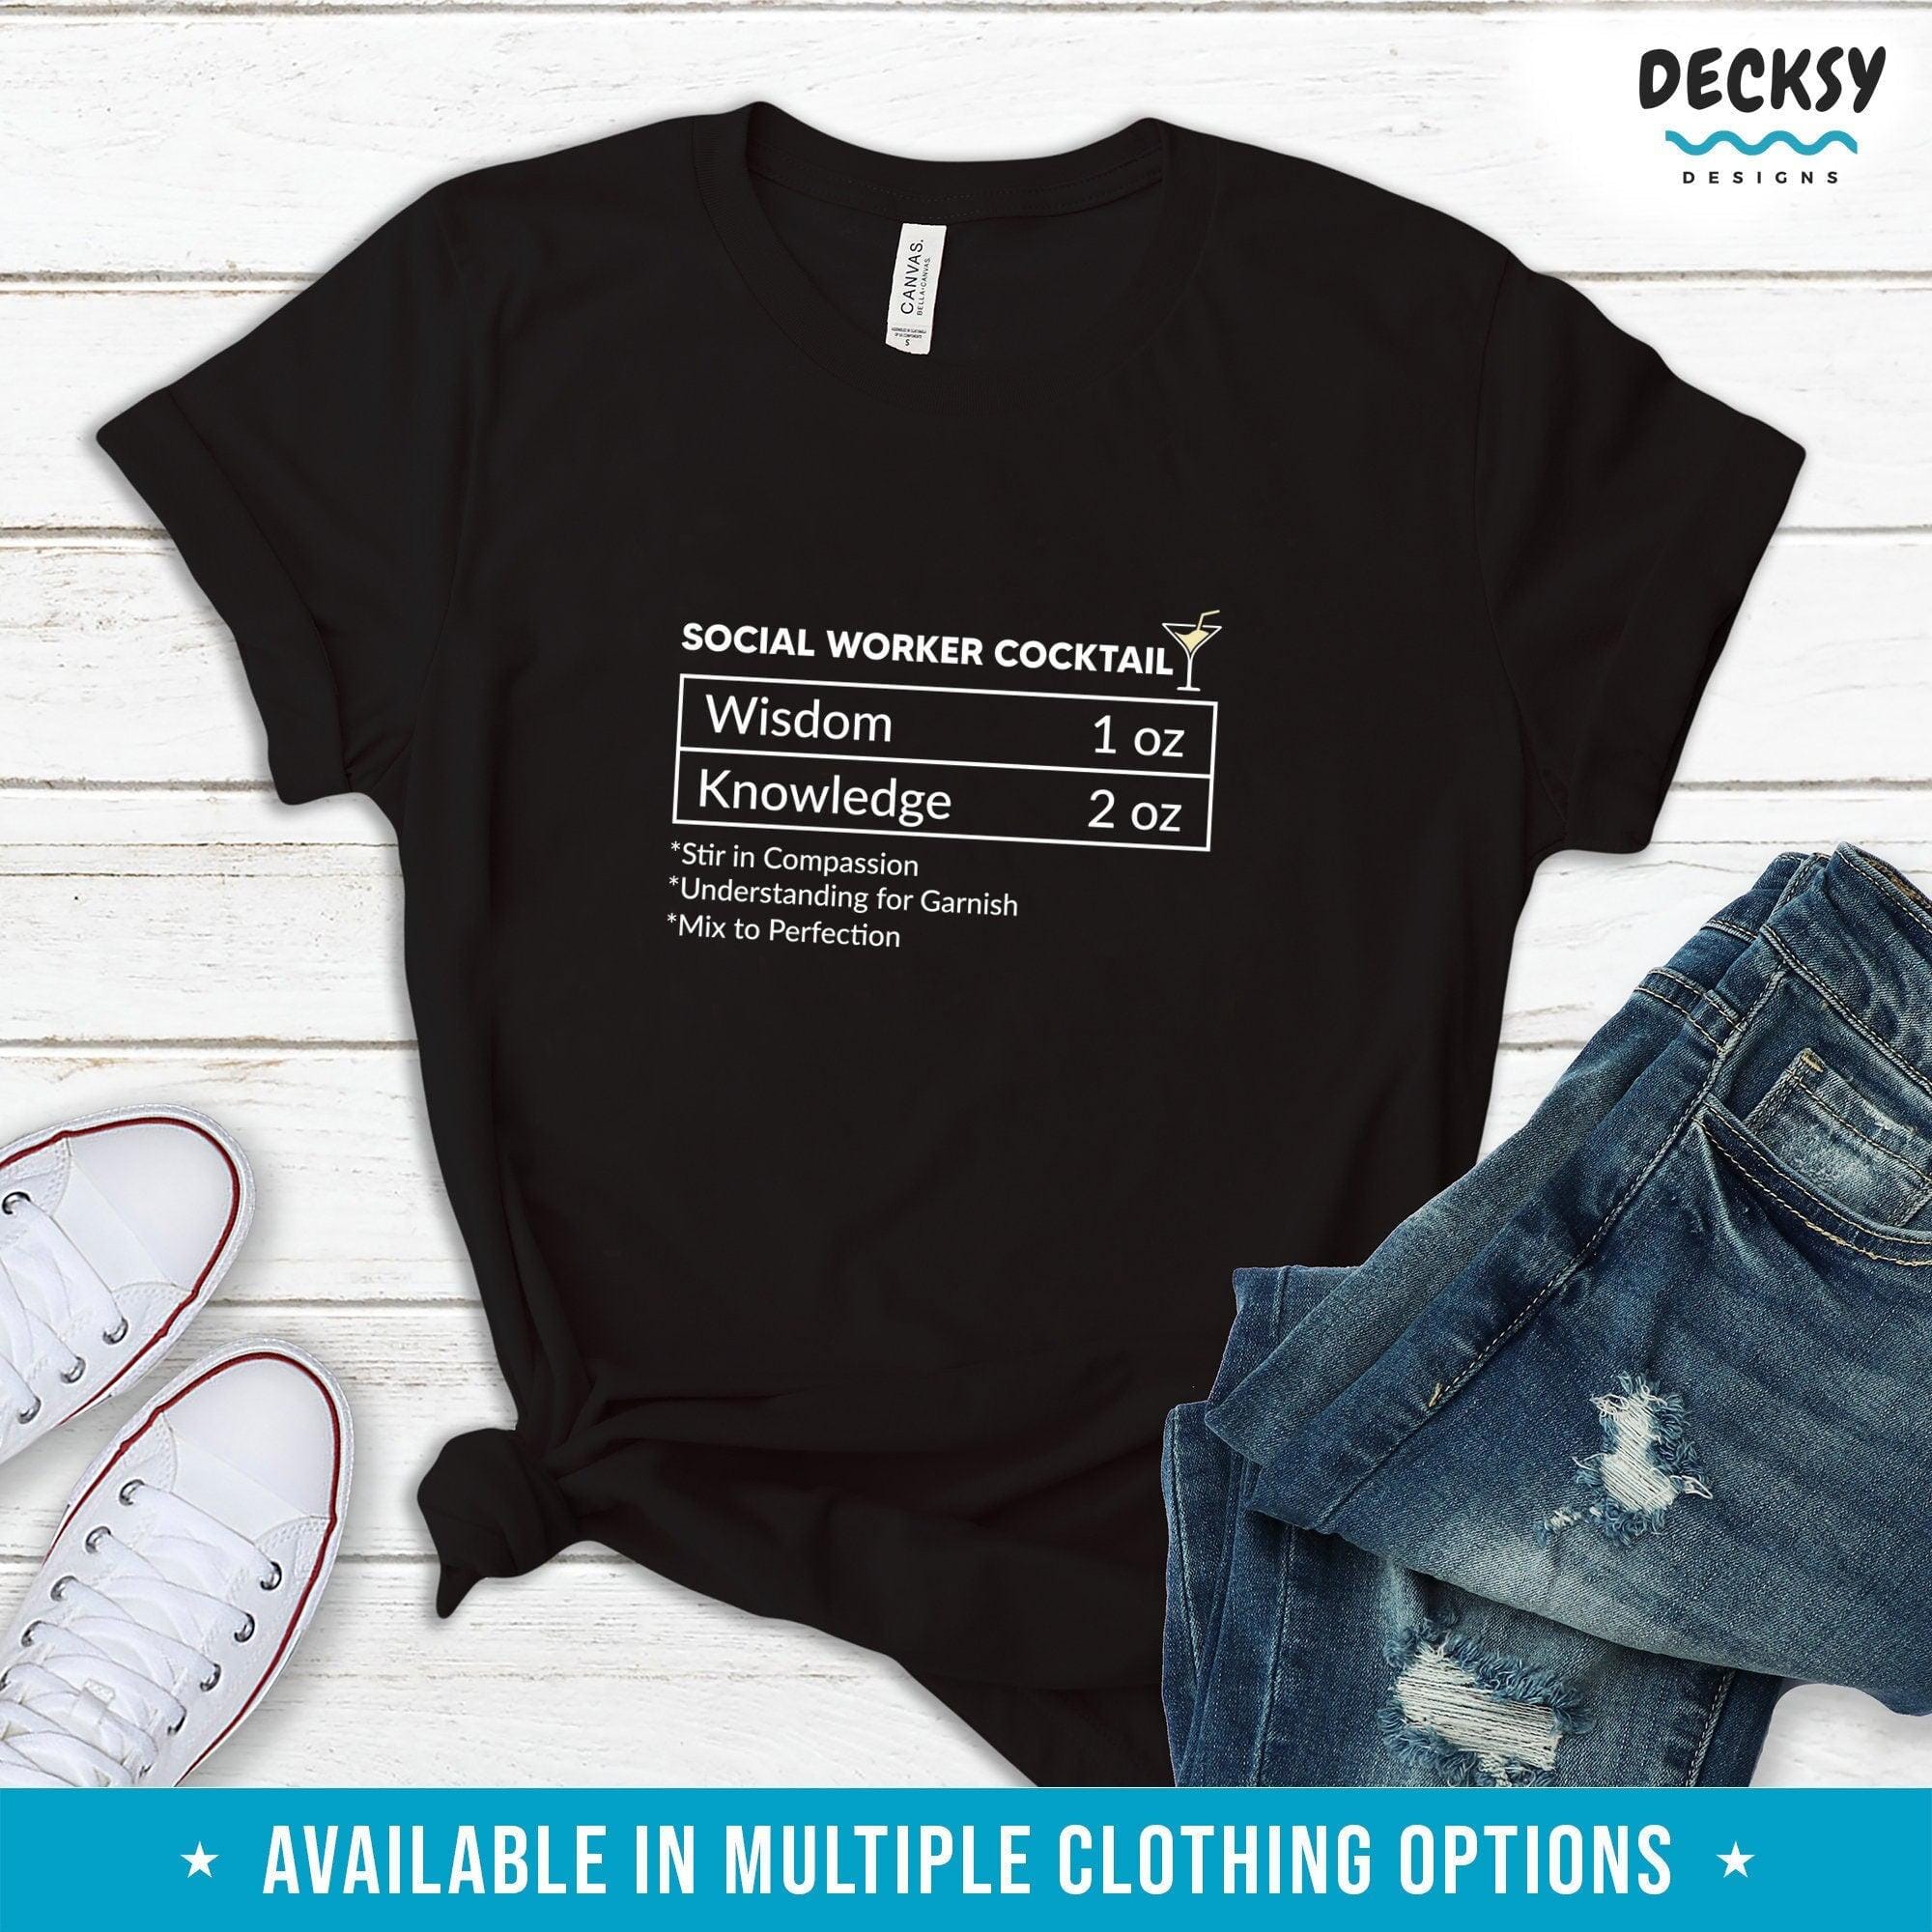 Social Worker Shirt, Social Work Gift-Clothing:Gender-Neutral Adult Clothing:Tops & Tees:T-shirts:Graphic Tees-DecksyDesigns